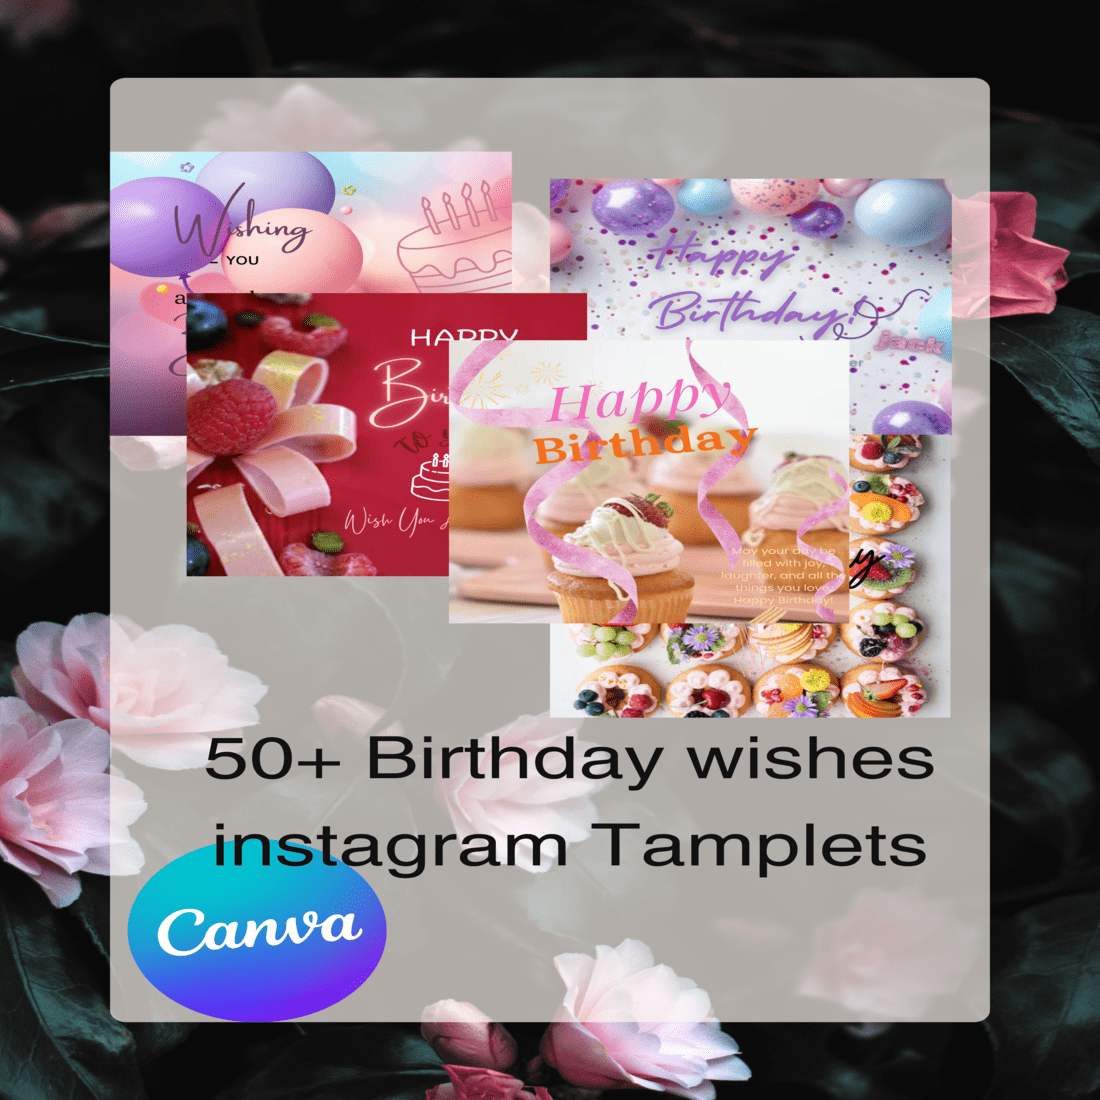 "Editable UNIQUE,MATCHLESS, ATTARACTIVE, Birthday Cards - Customizable Templates on Canva" cover image.